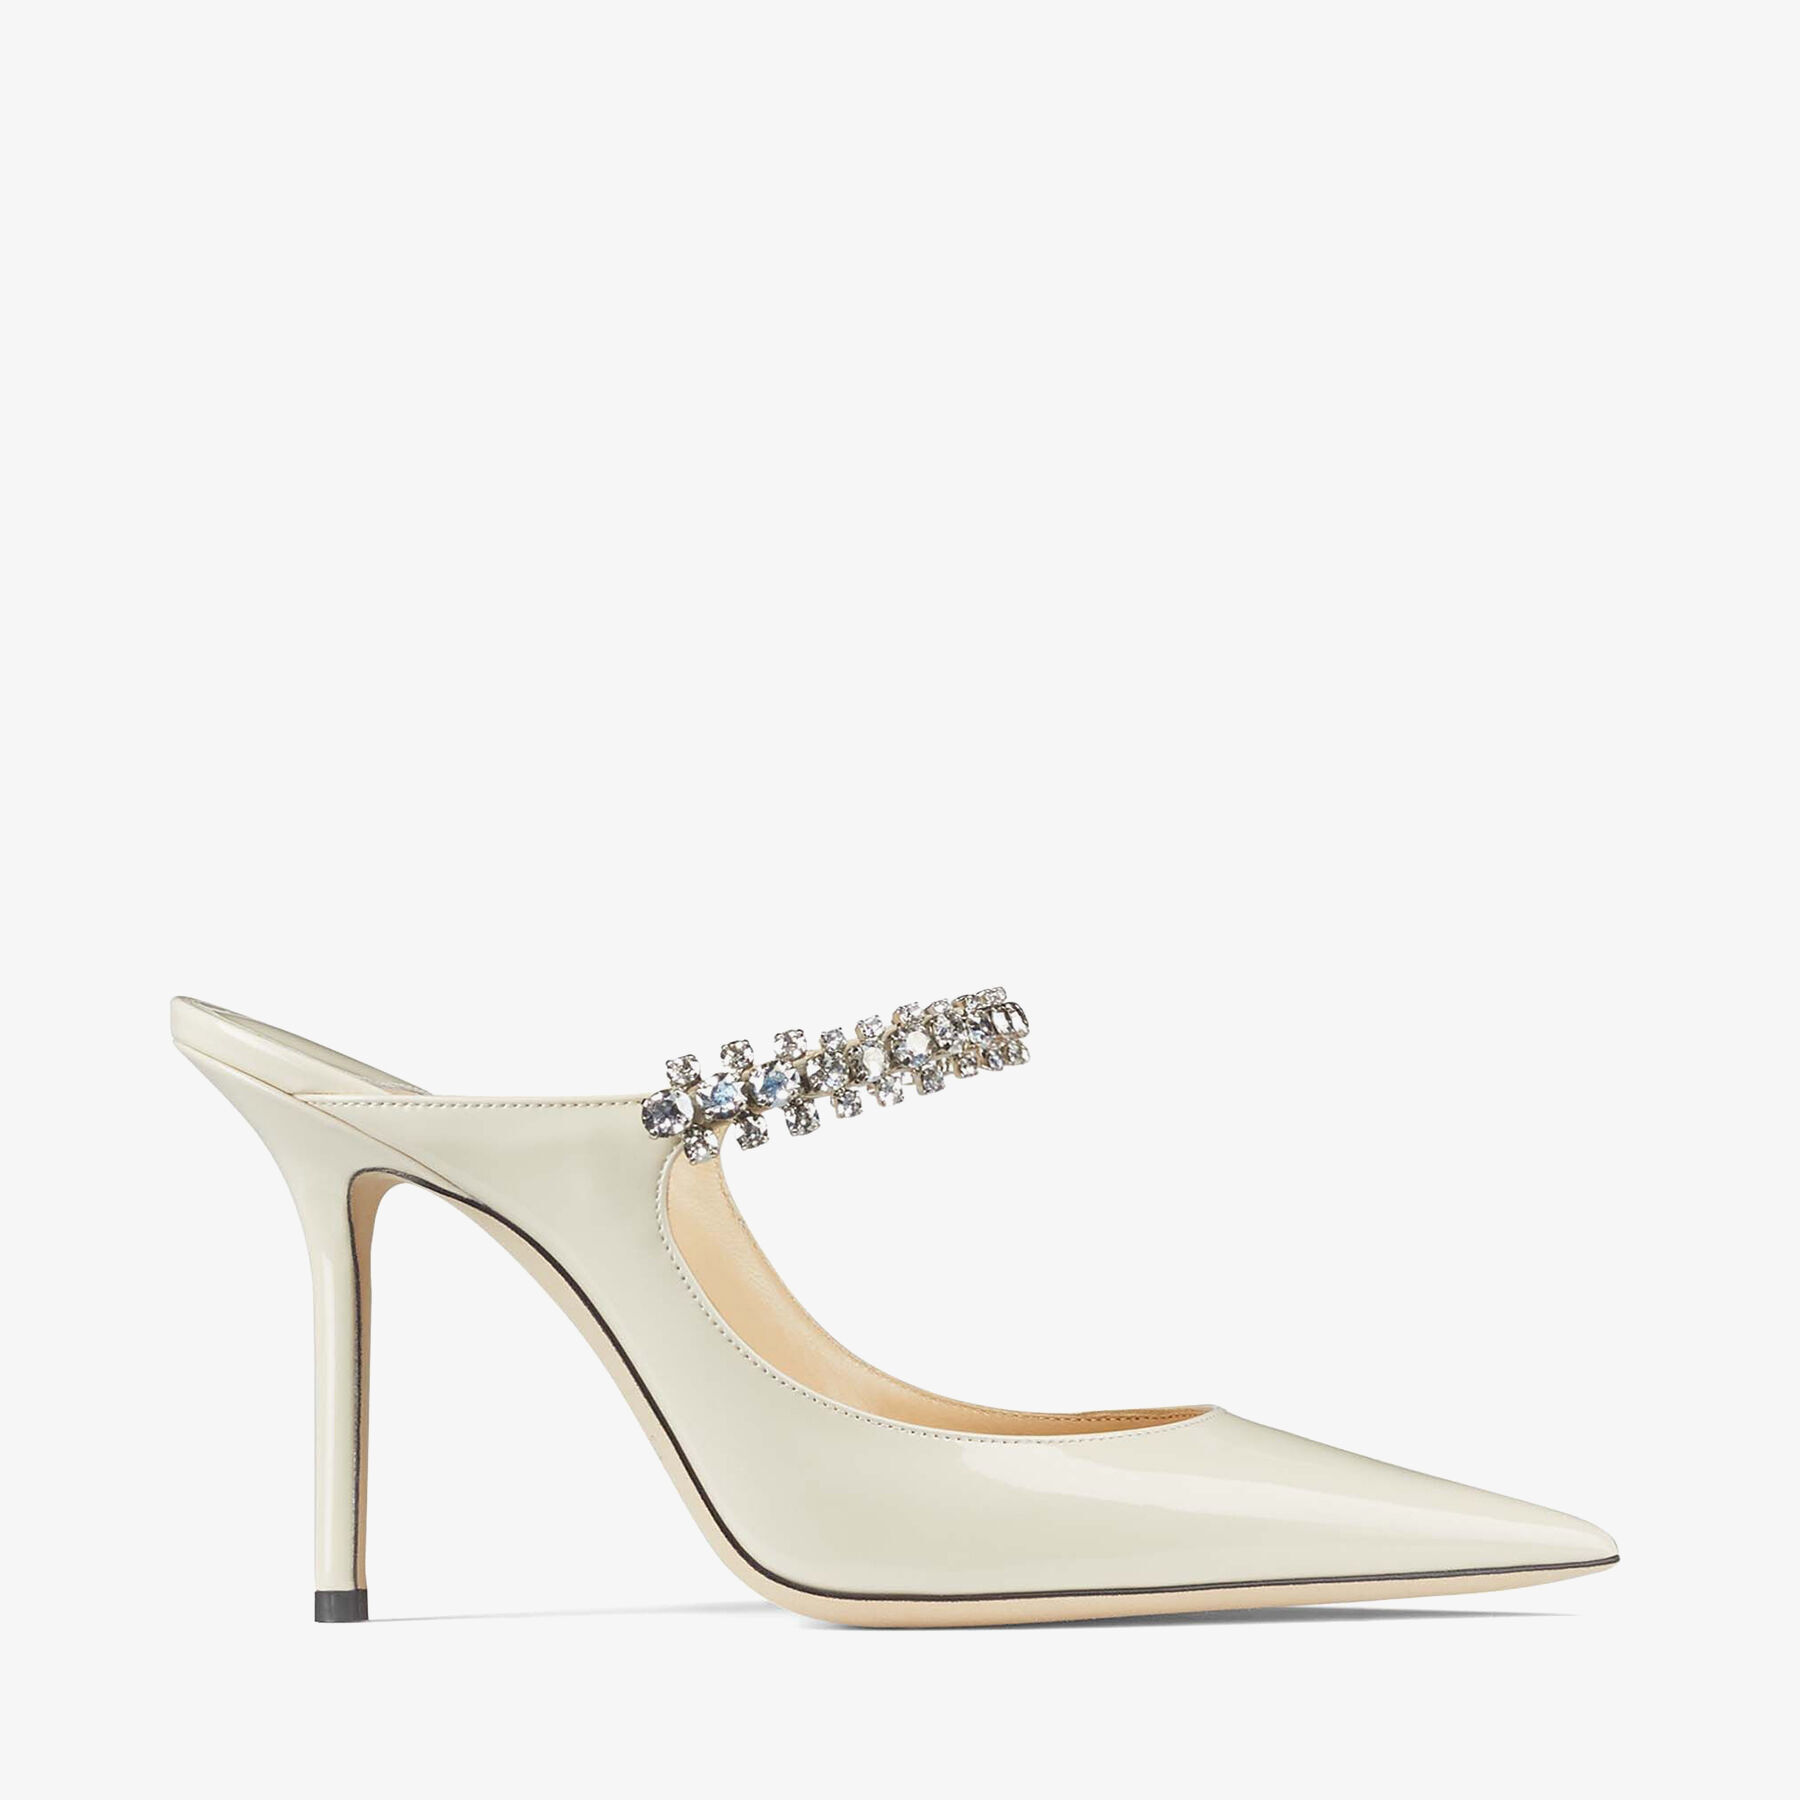 Bing 100 | Linen Patent Leather Mules with Crystal Strap | JIMMY CHOO